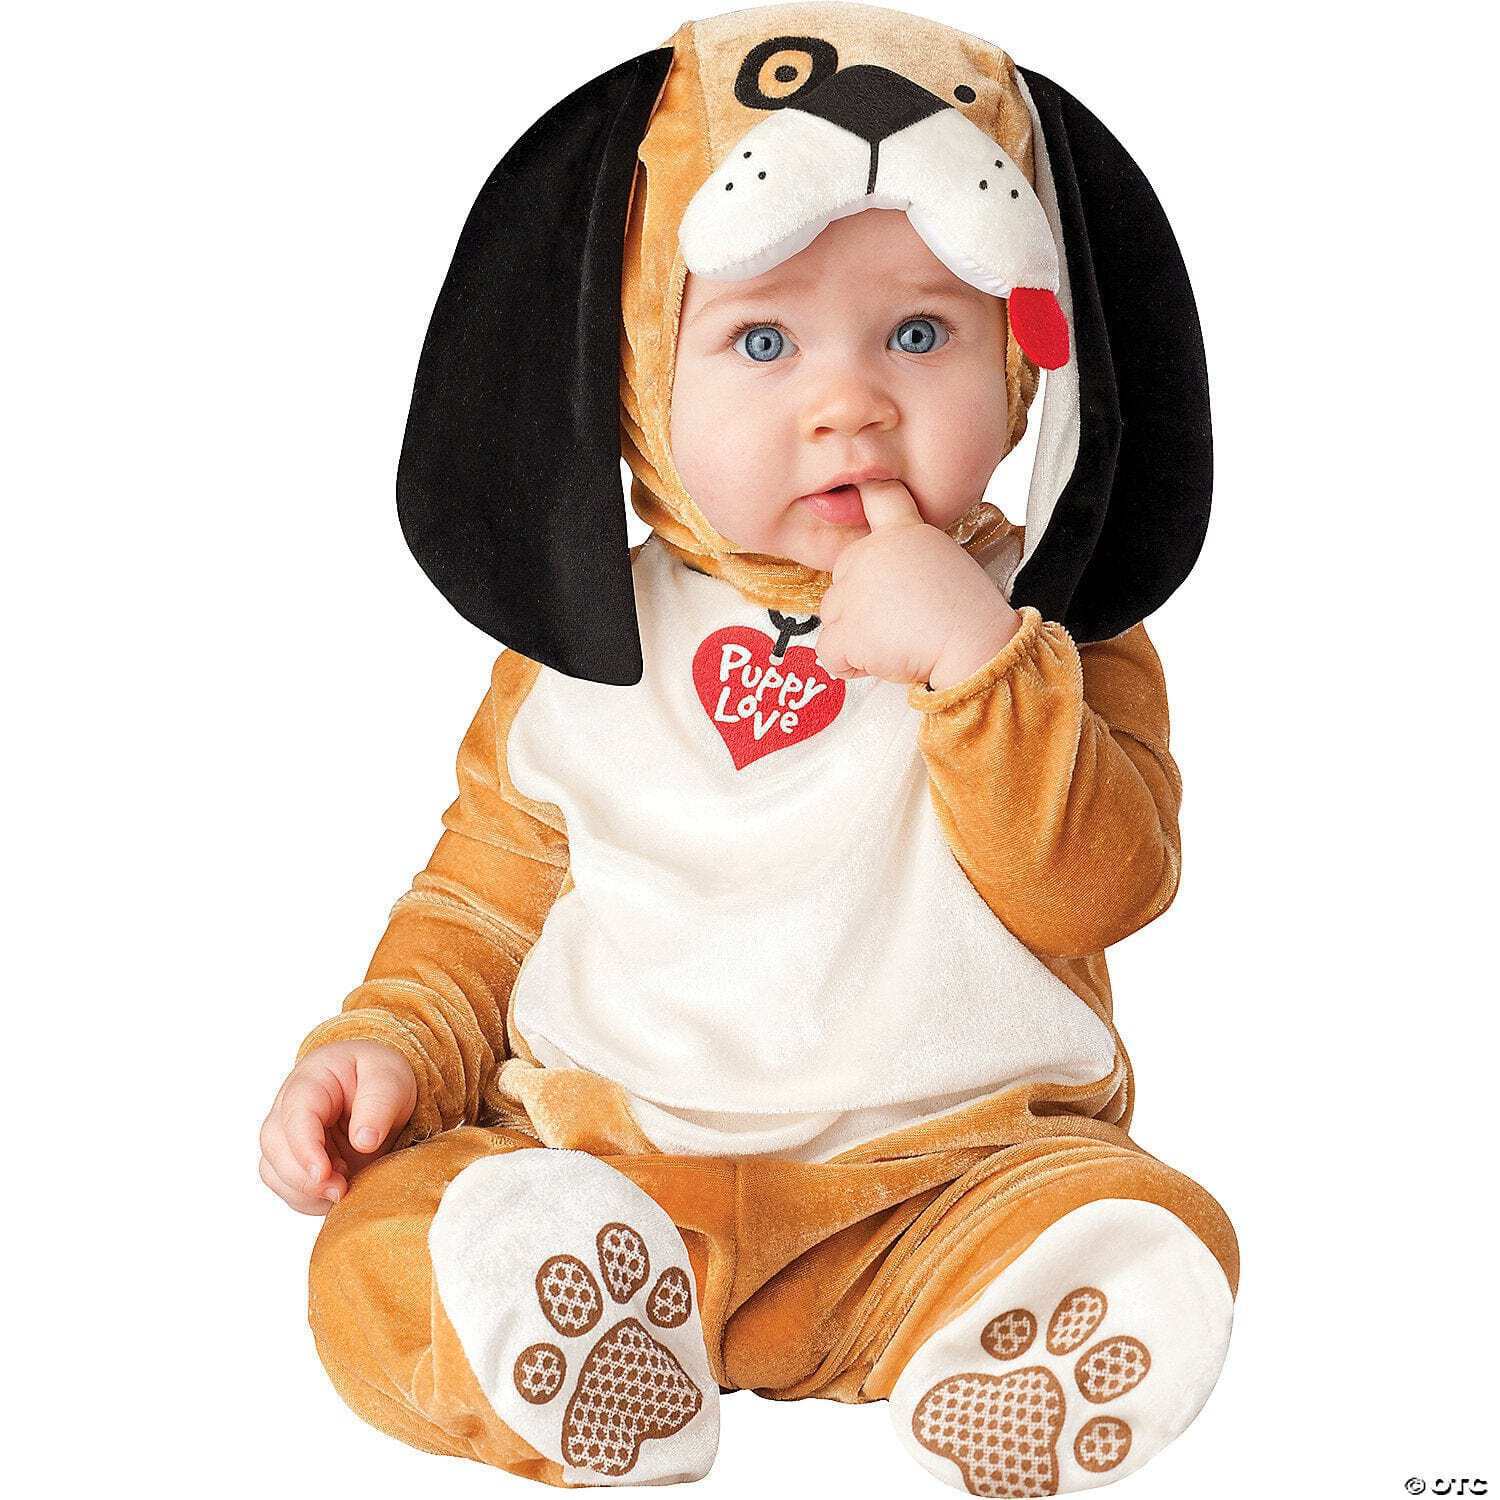 InCharacter Costumes Puppy Love Halloween Fancy-Dress Costume for Infant, 12-18 Months - image 1 of 1